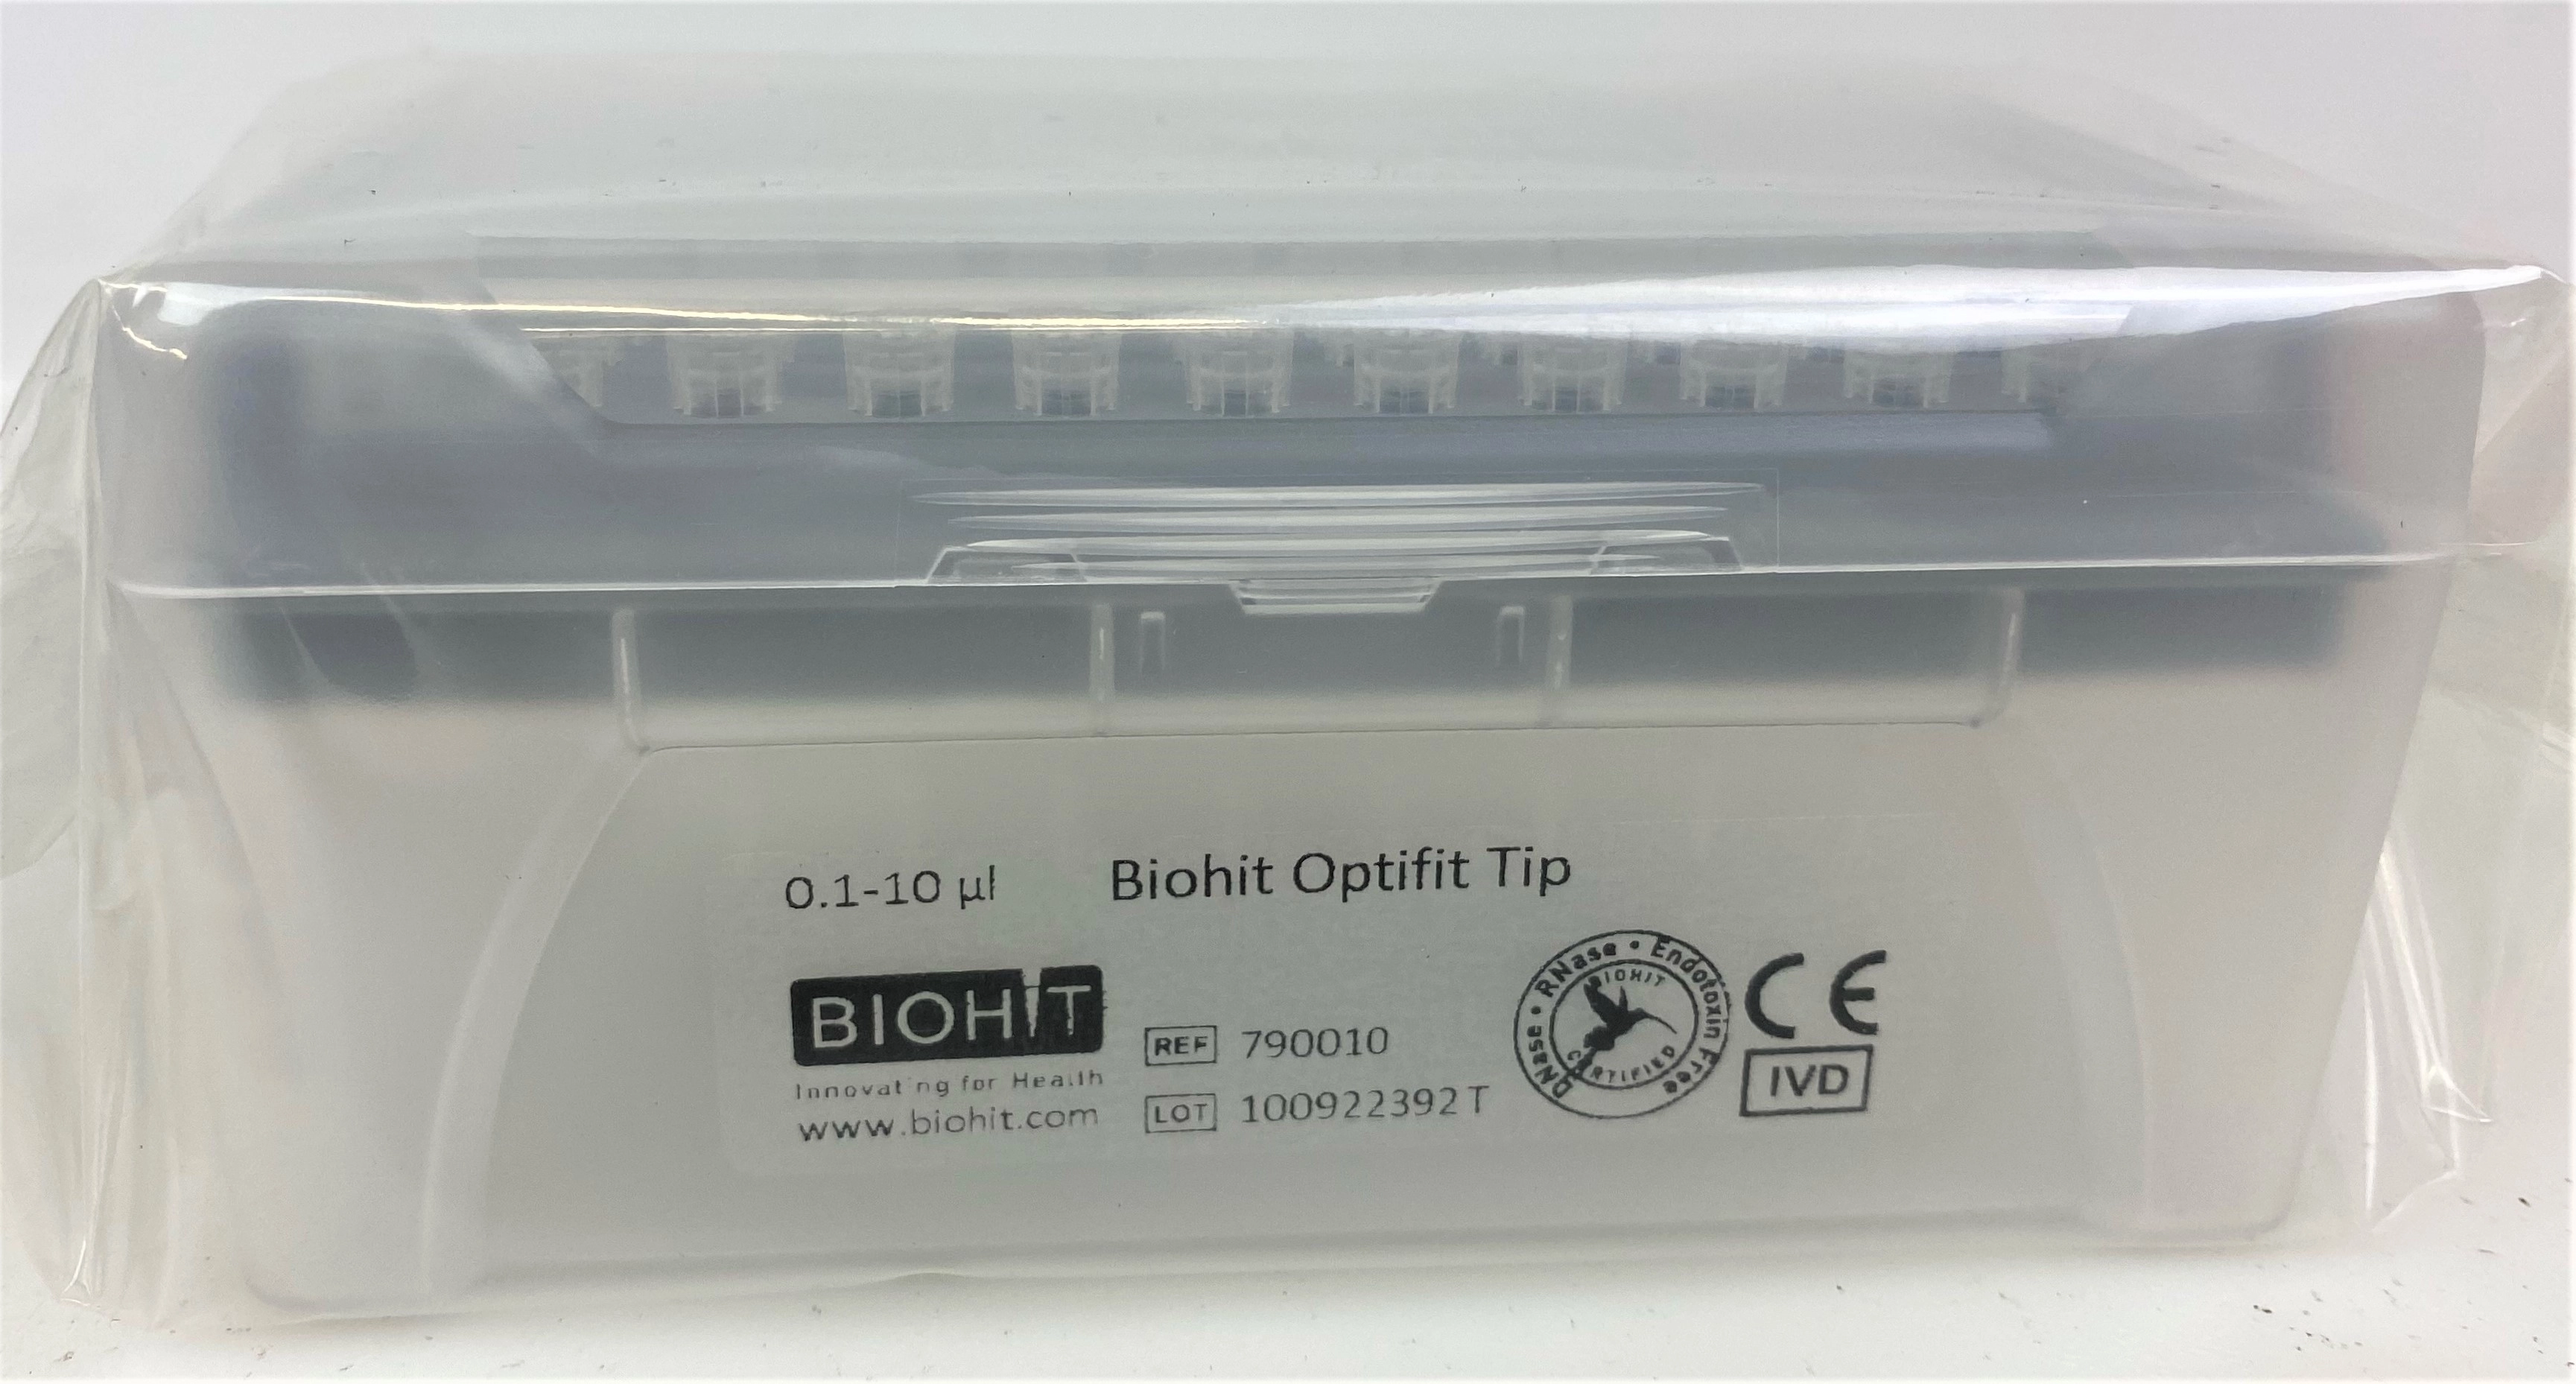 BioHit Optifit 790010 Pipette Tips - 0.2 to 10 &micro;L (Rack of 96 Tips)